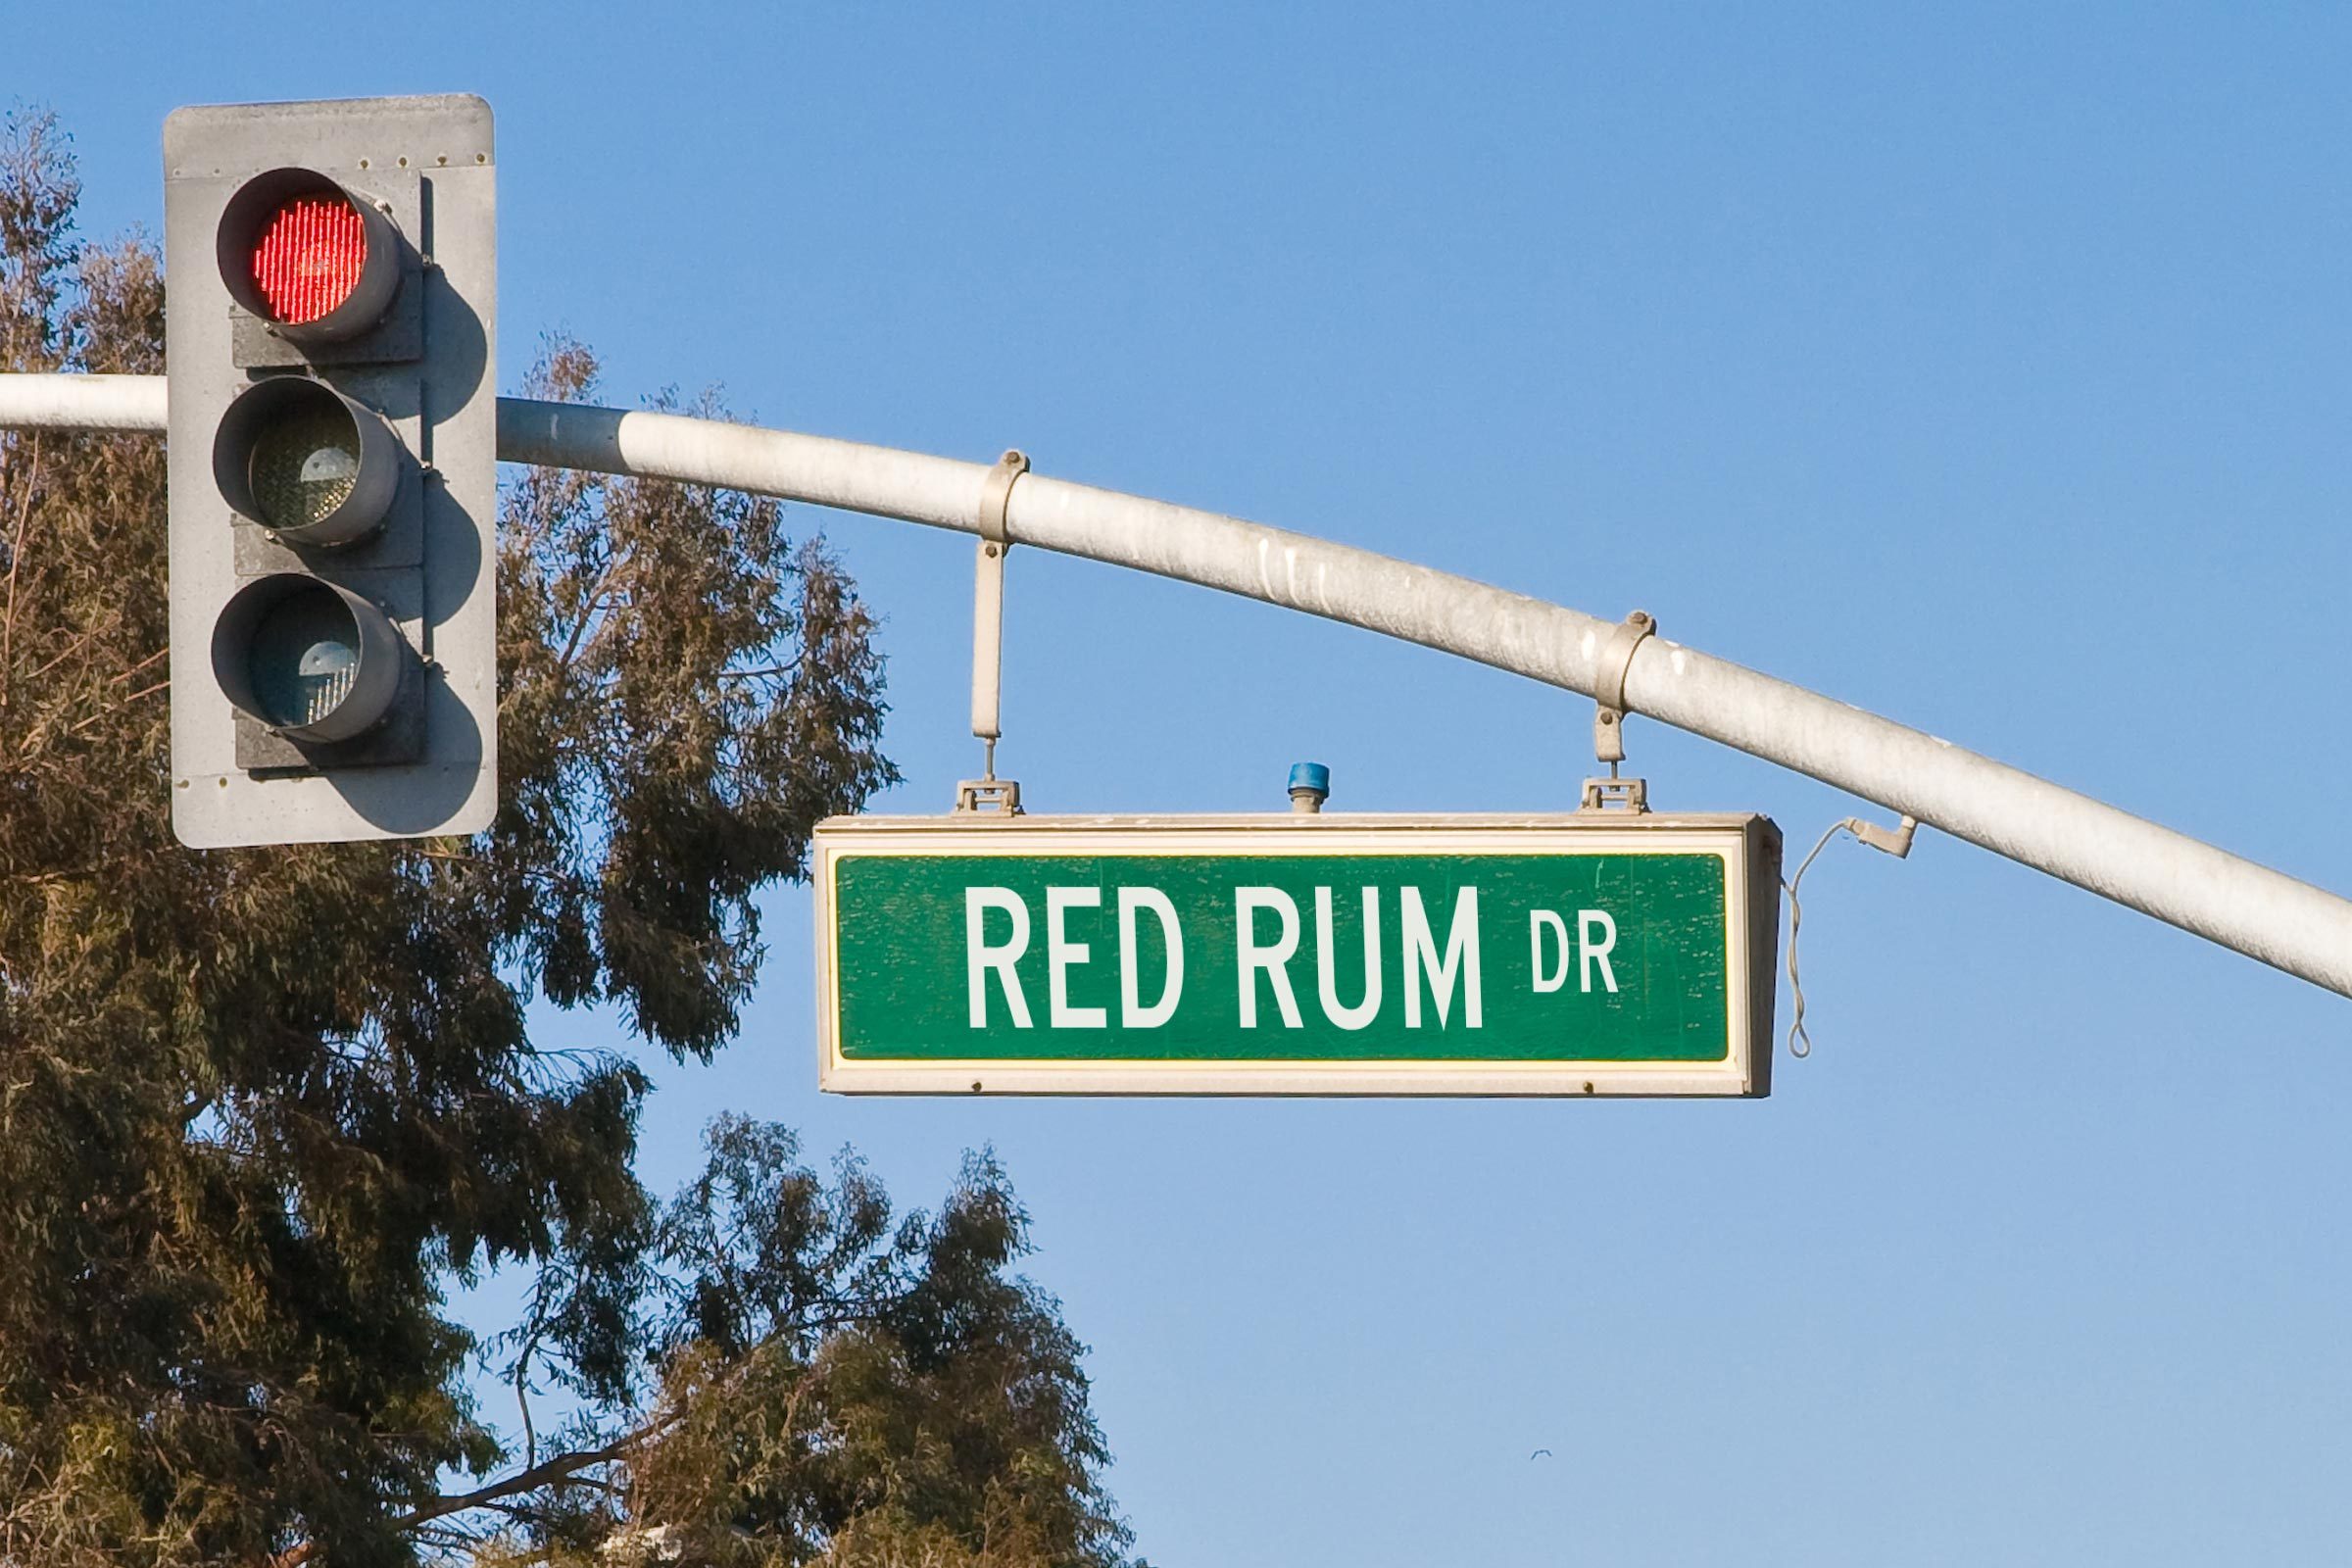 50 Funny Street Names: The Funniest Street Names in Every State